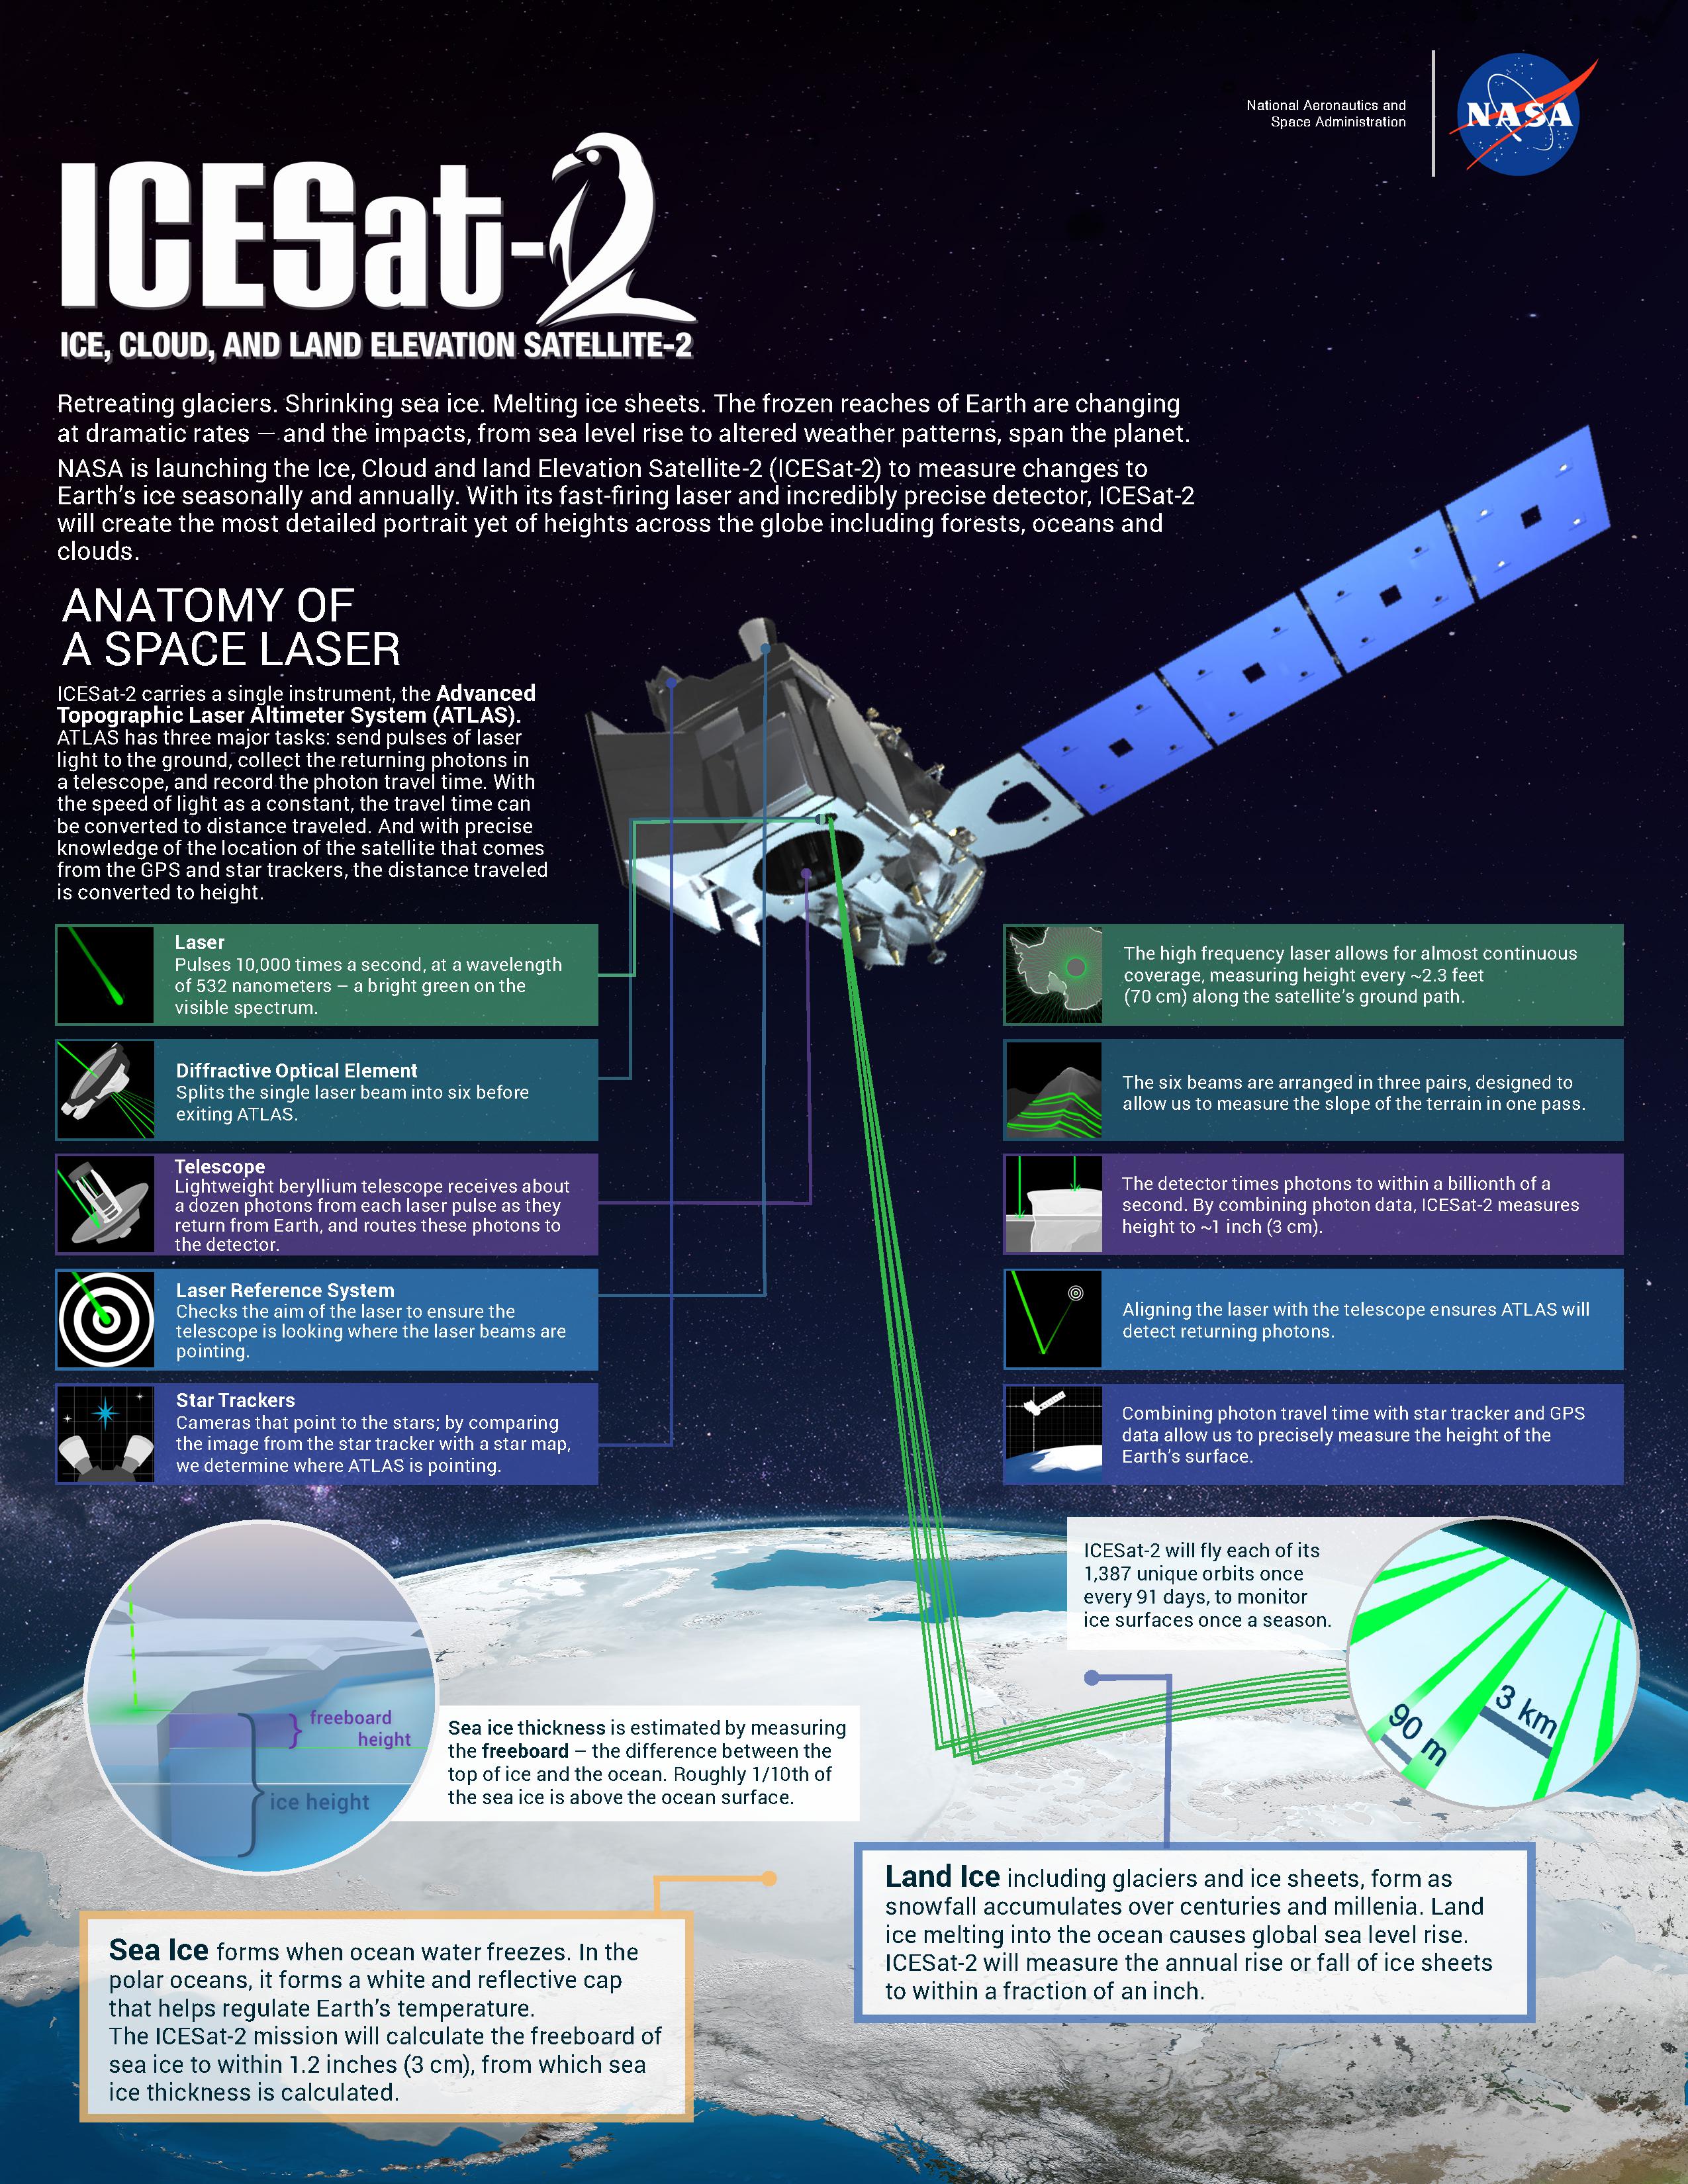 NASA’s Ice, Cloud and land Elevation Satellite-2 (ICESat-2) will measure height with a laser instrument that features components designed to provide precise data. Credits: NASA/Adriana Manrique Gutierrez A Technological Leap